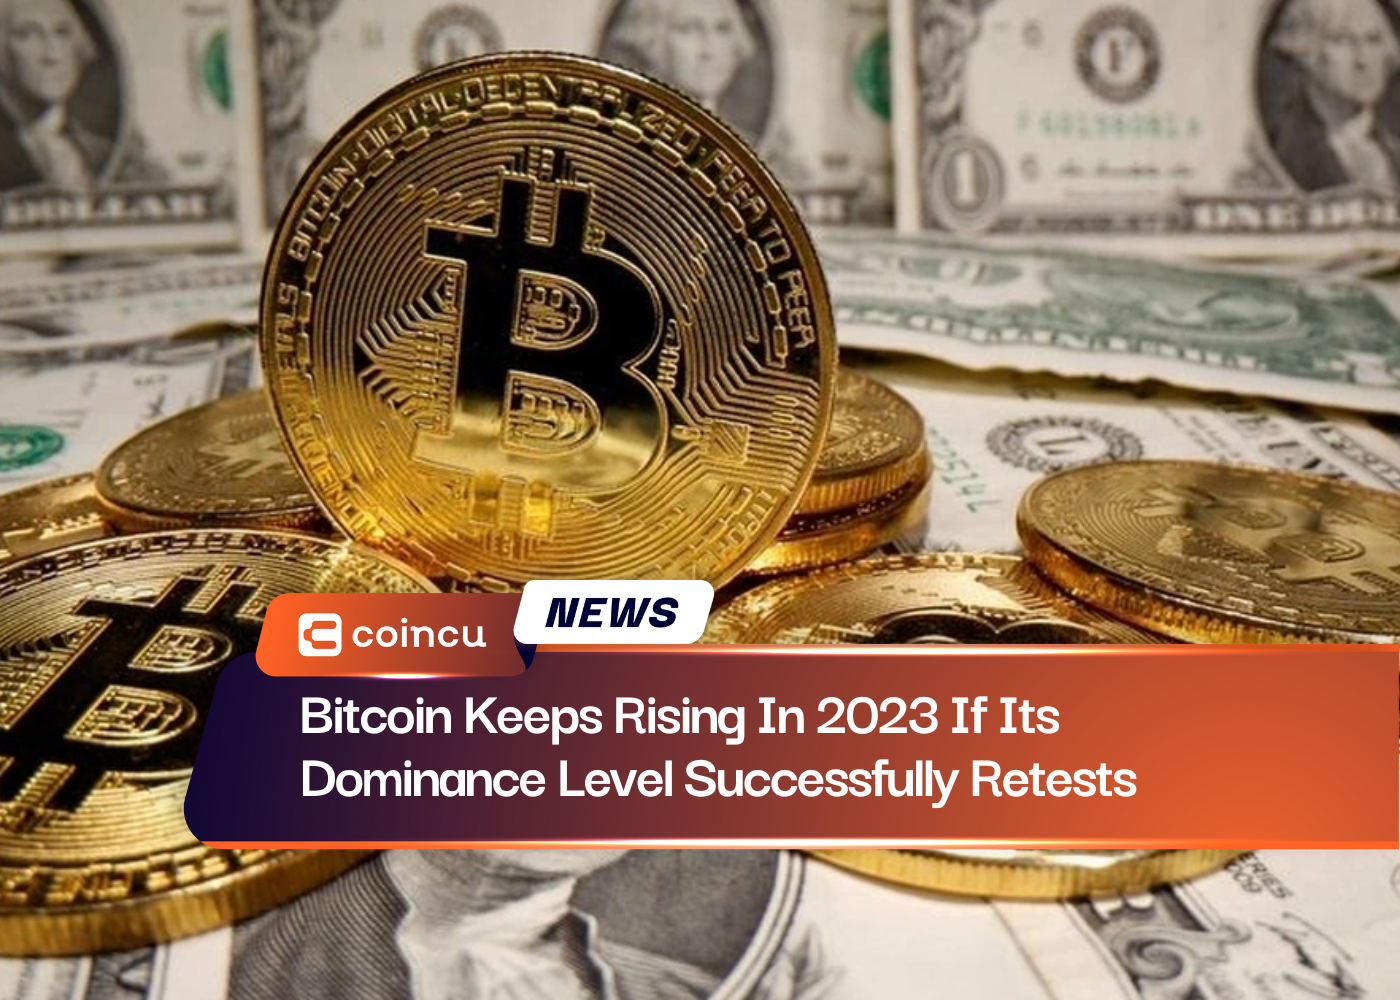 Bitcoin Keeps Rising In 2023 If Its Dominance Level Successfully Retests